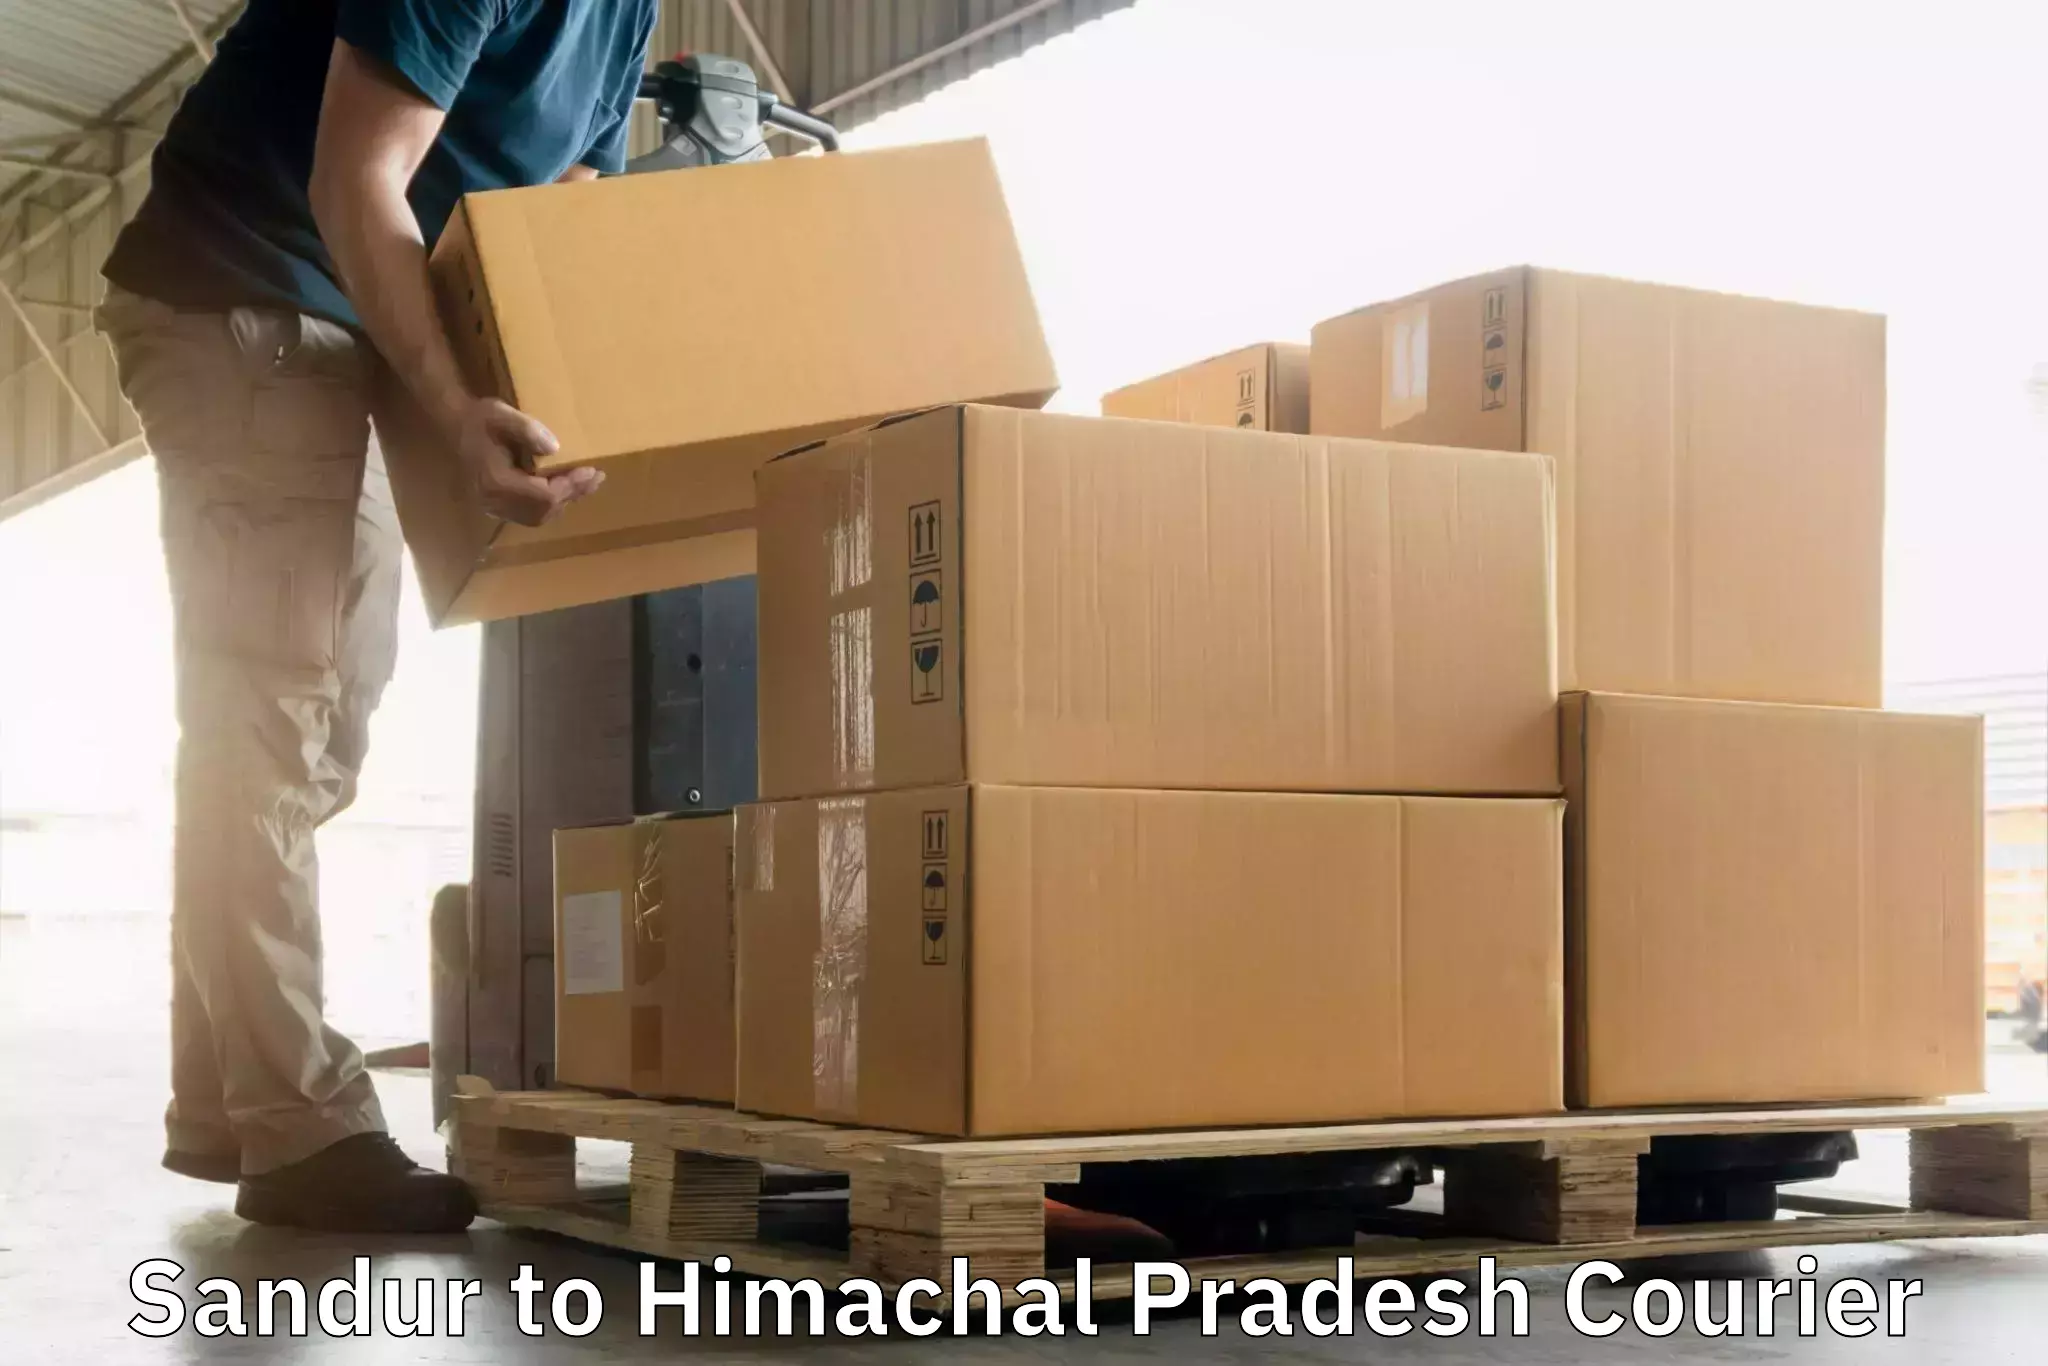 Reliable courier service in Sandur to Himachal Pradesh